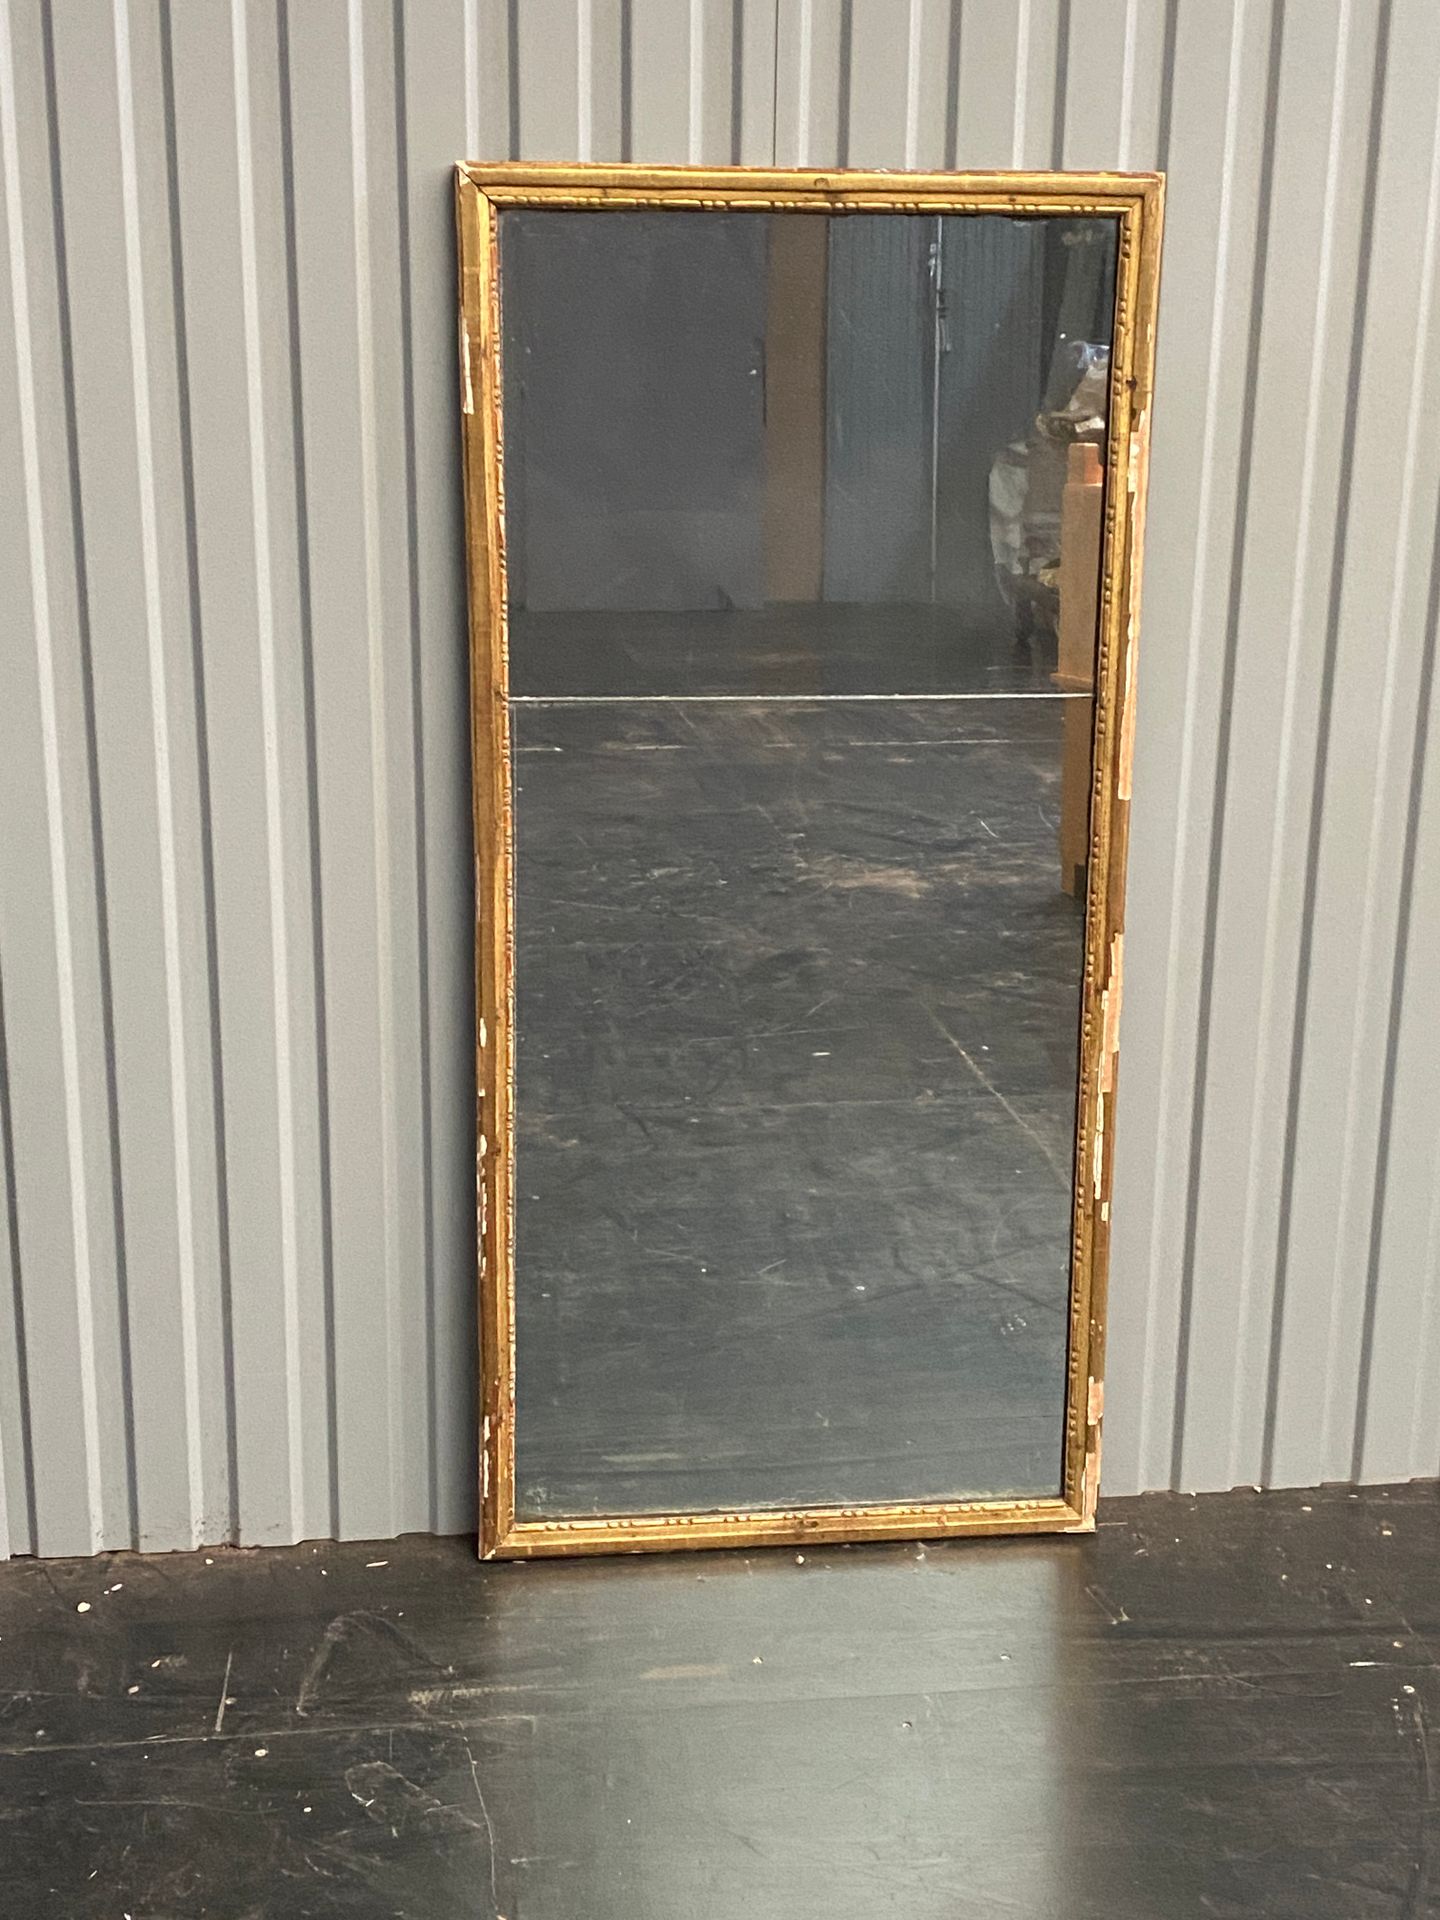 Null Rectangular mirror with gilded frame

Accidents

H : 136 - W : 64 cm